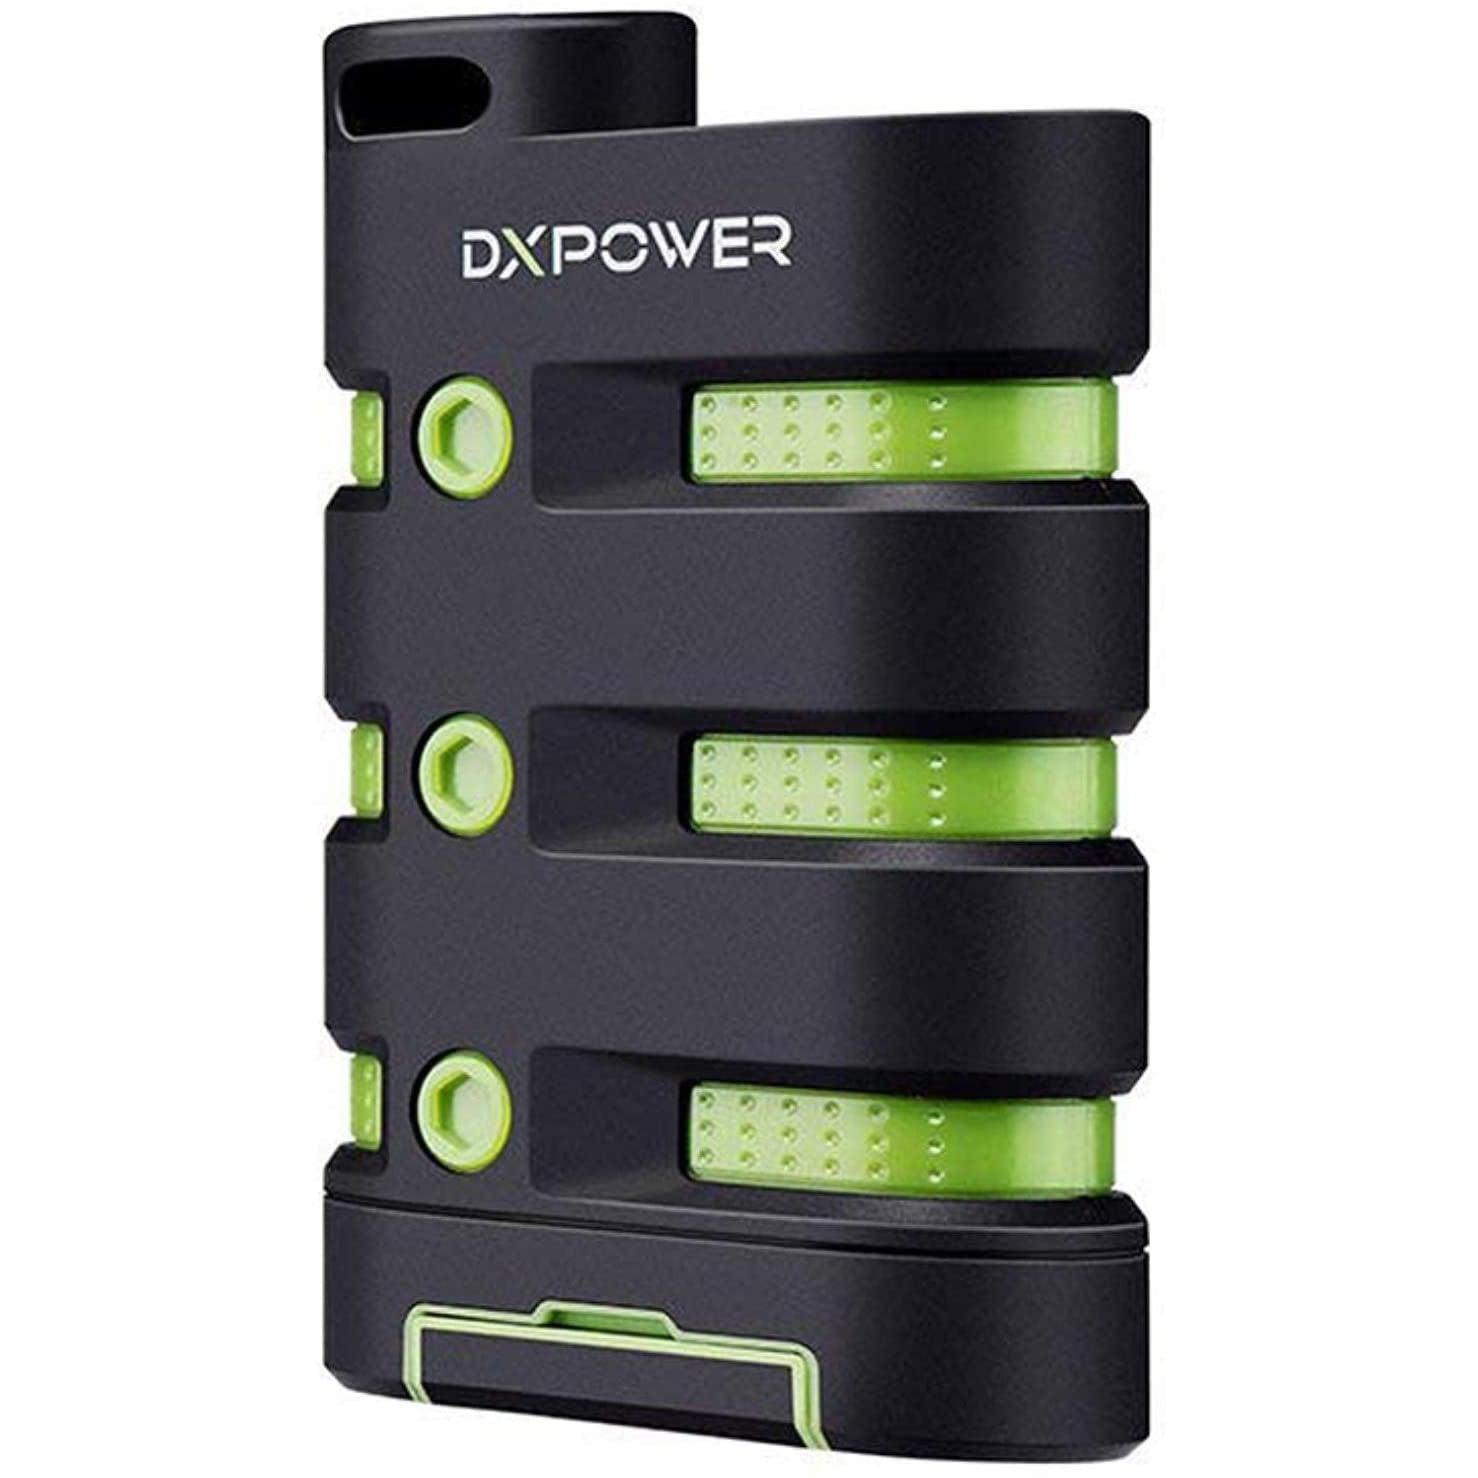 Dxpower ARMOR 10000mAh Power Bank External Battery Pack Waterproof Dustproof Shockproof Outdoor Emergency Portable Charger